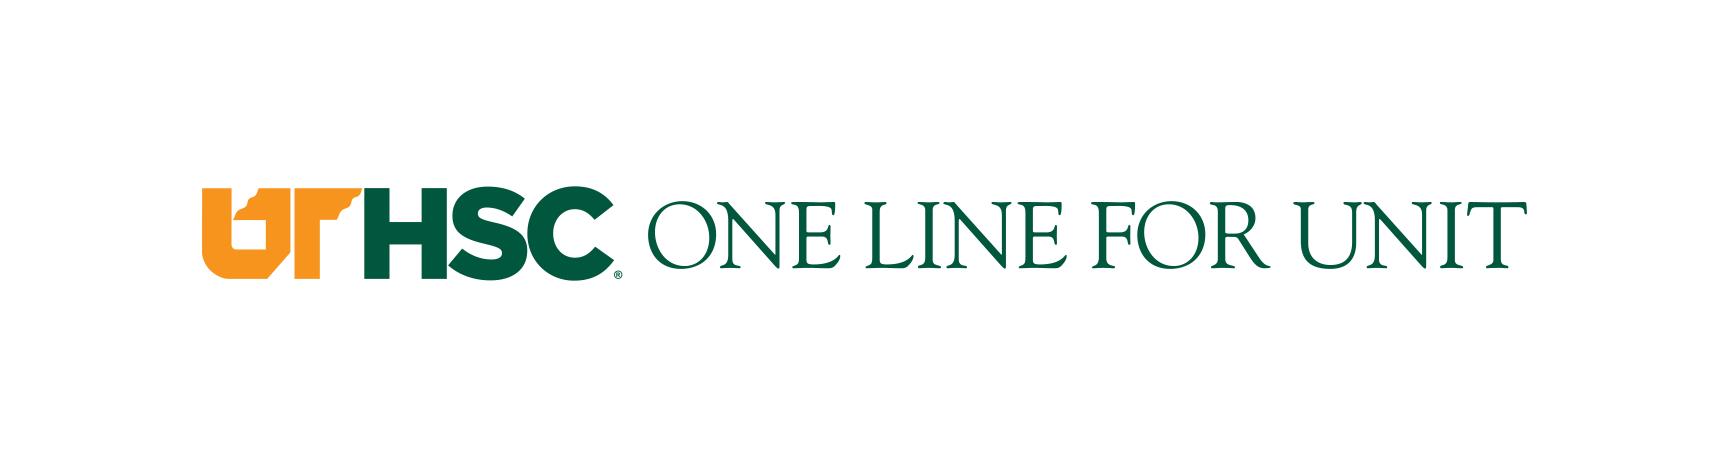 One line for unit